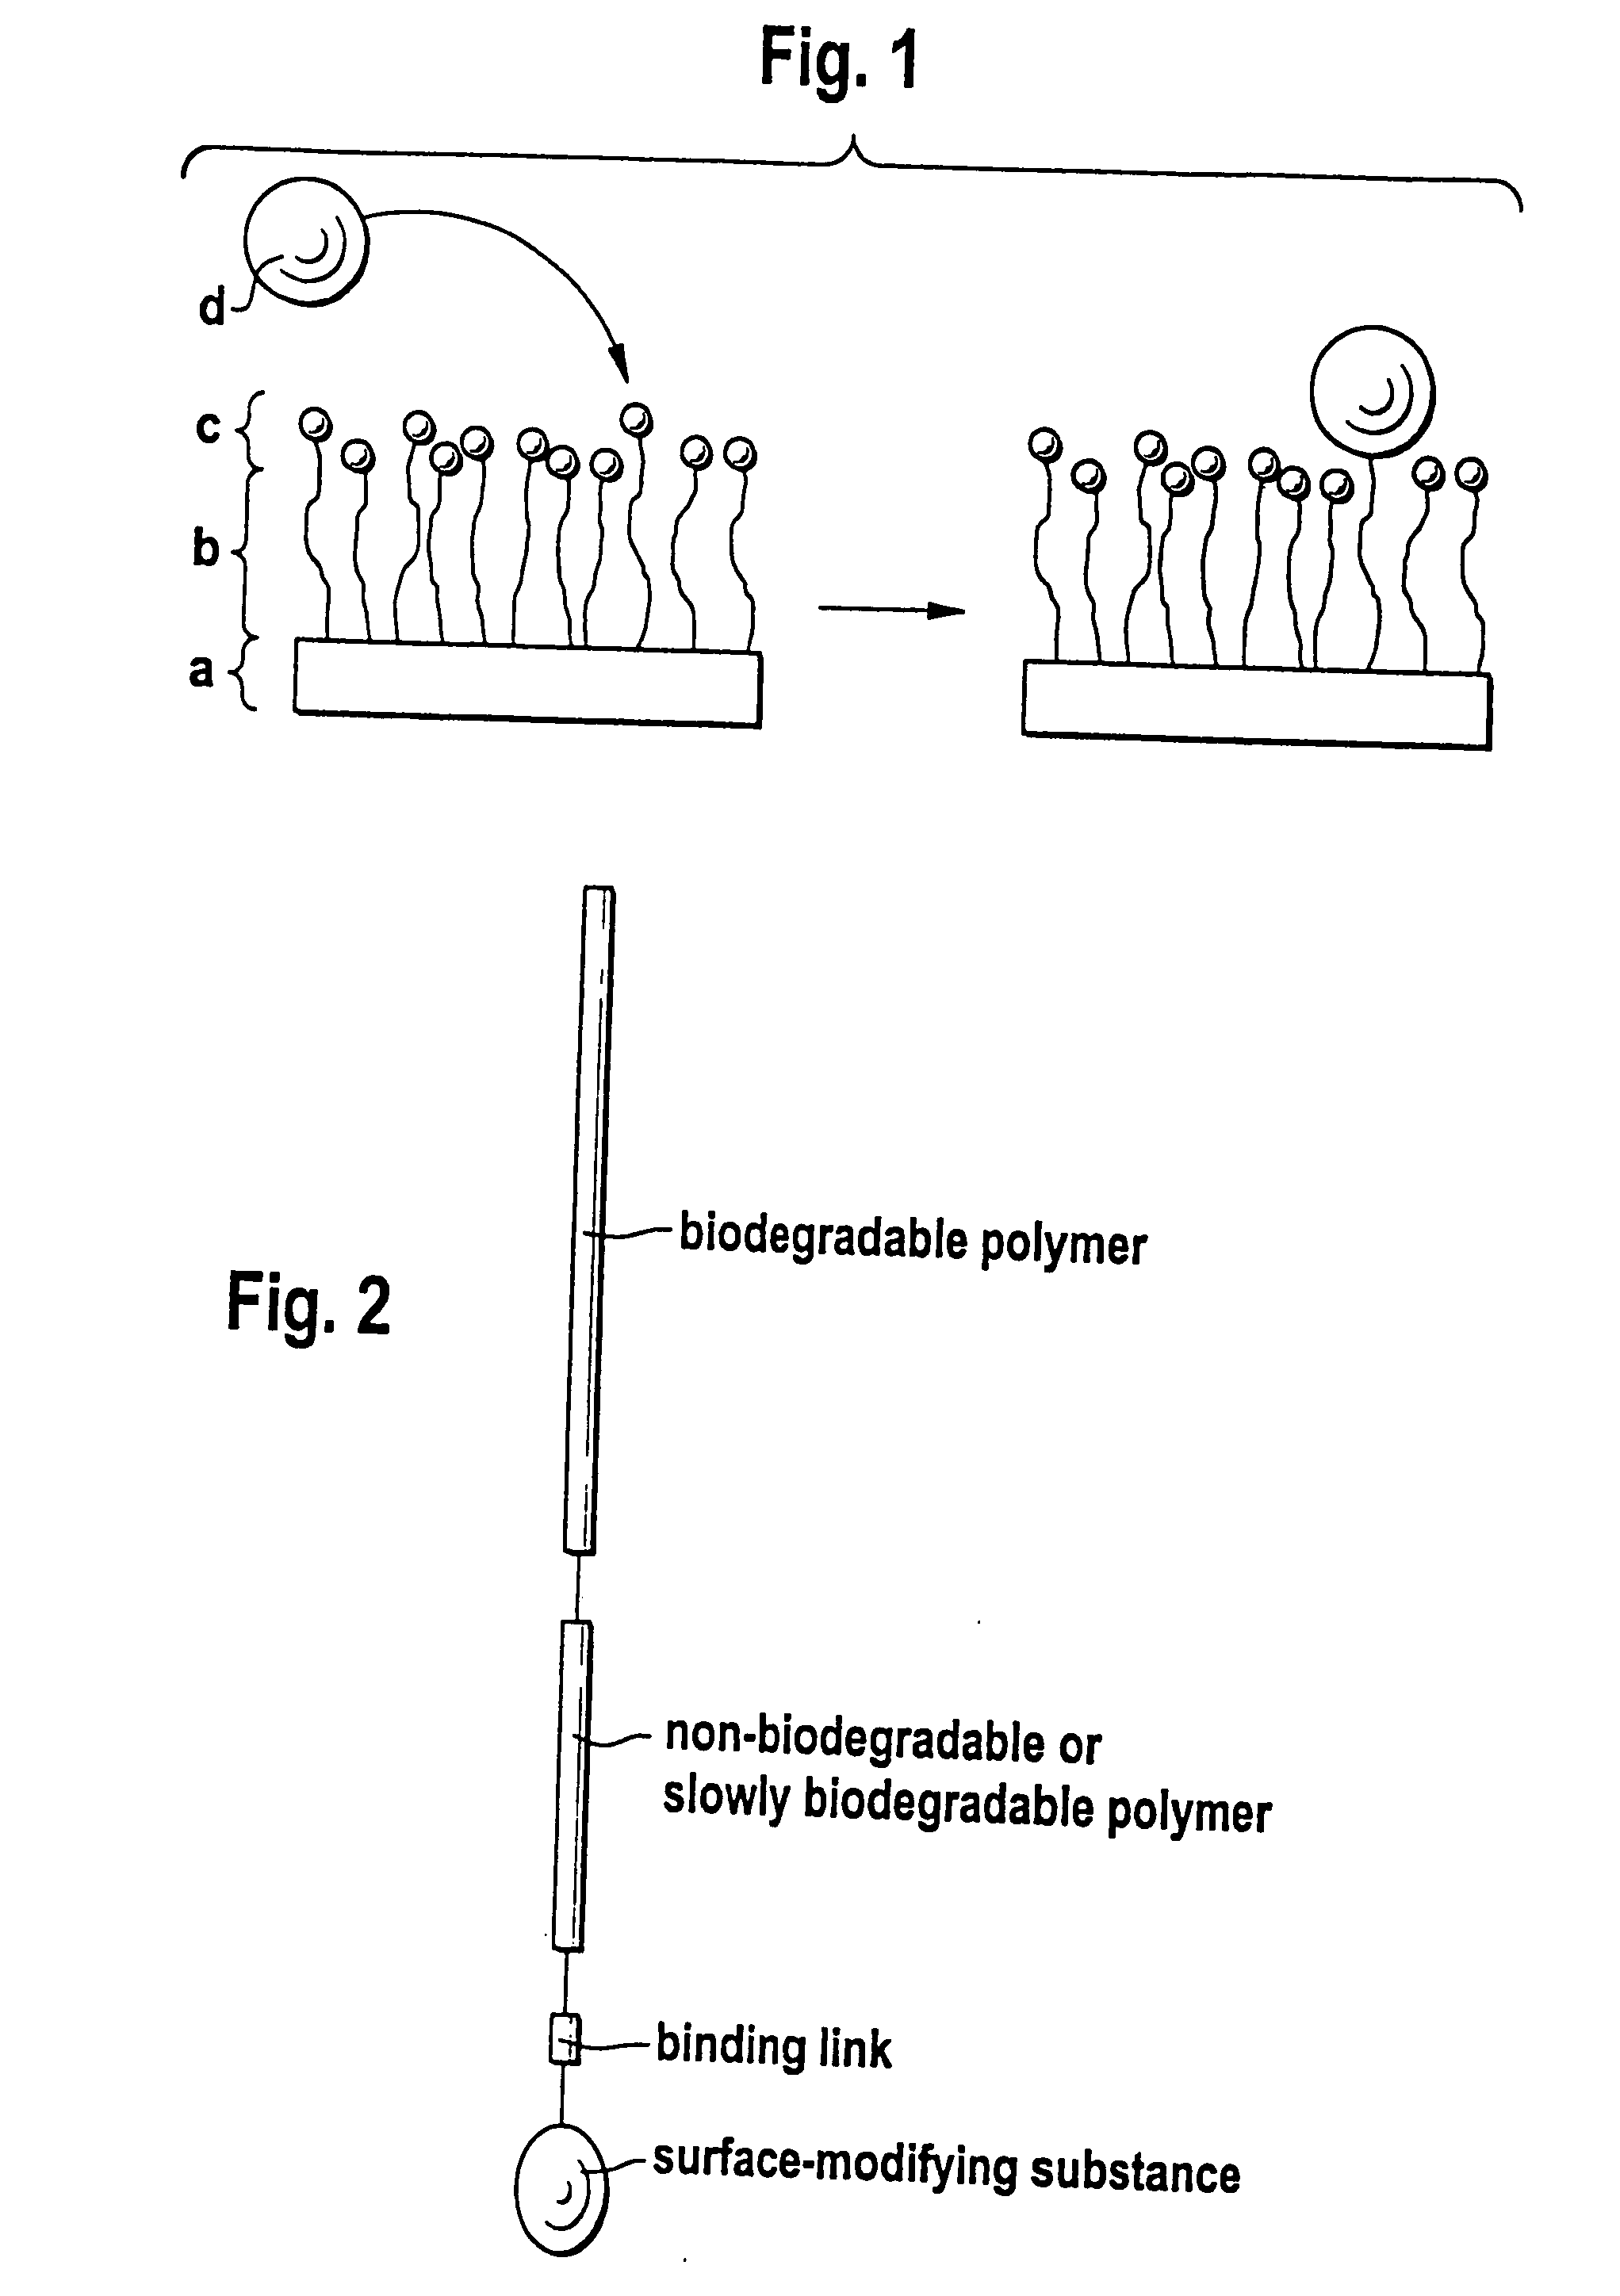 Biodegradable block copolymers with modifiable surface